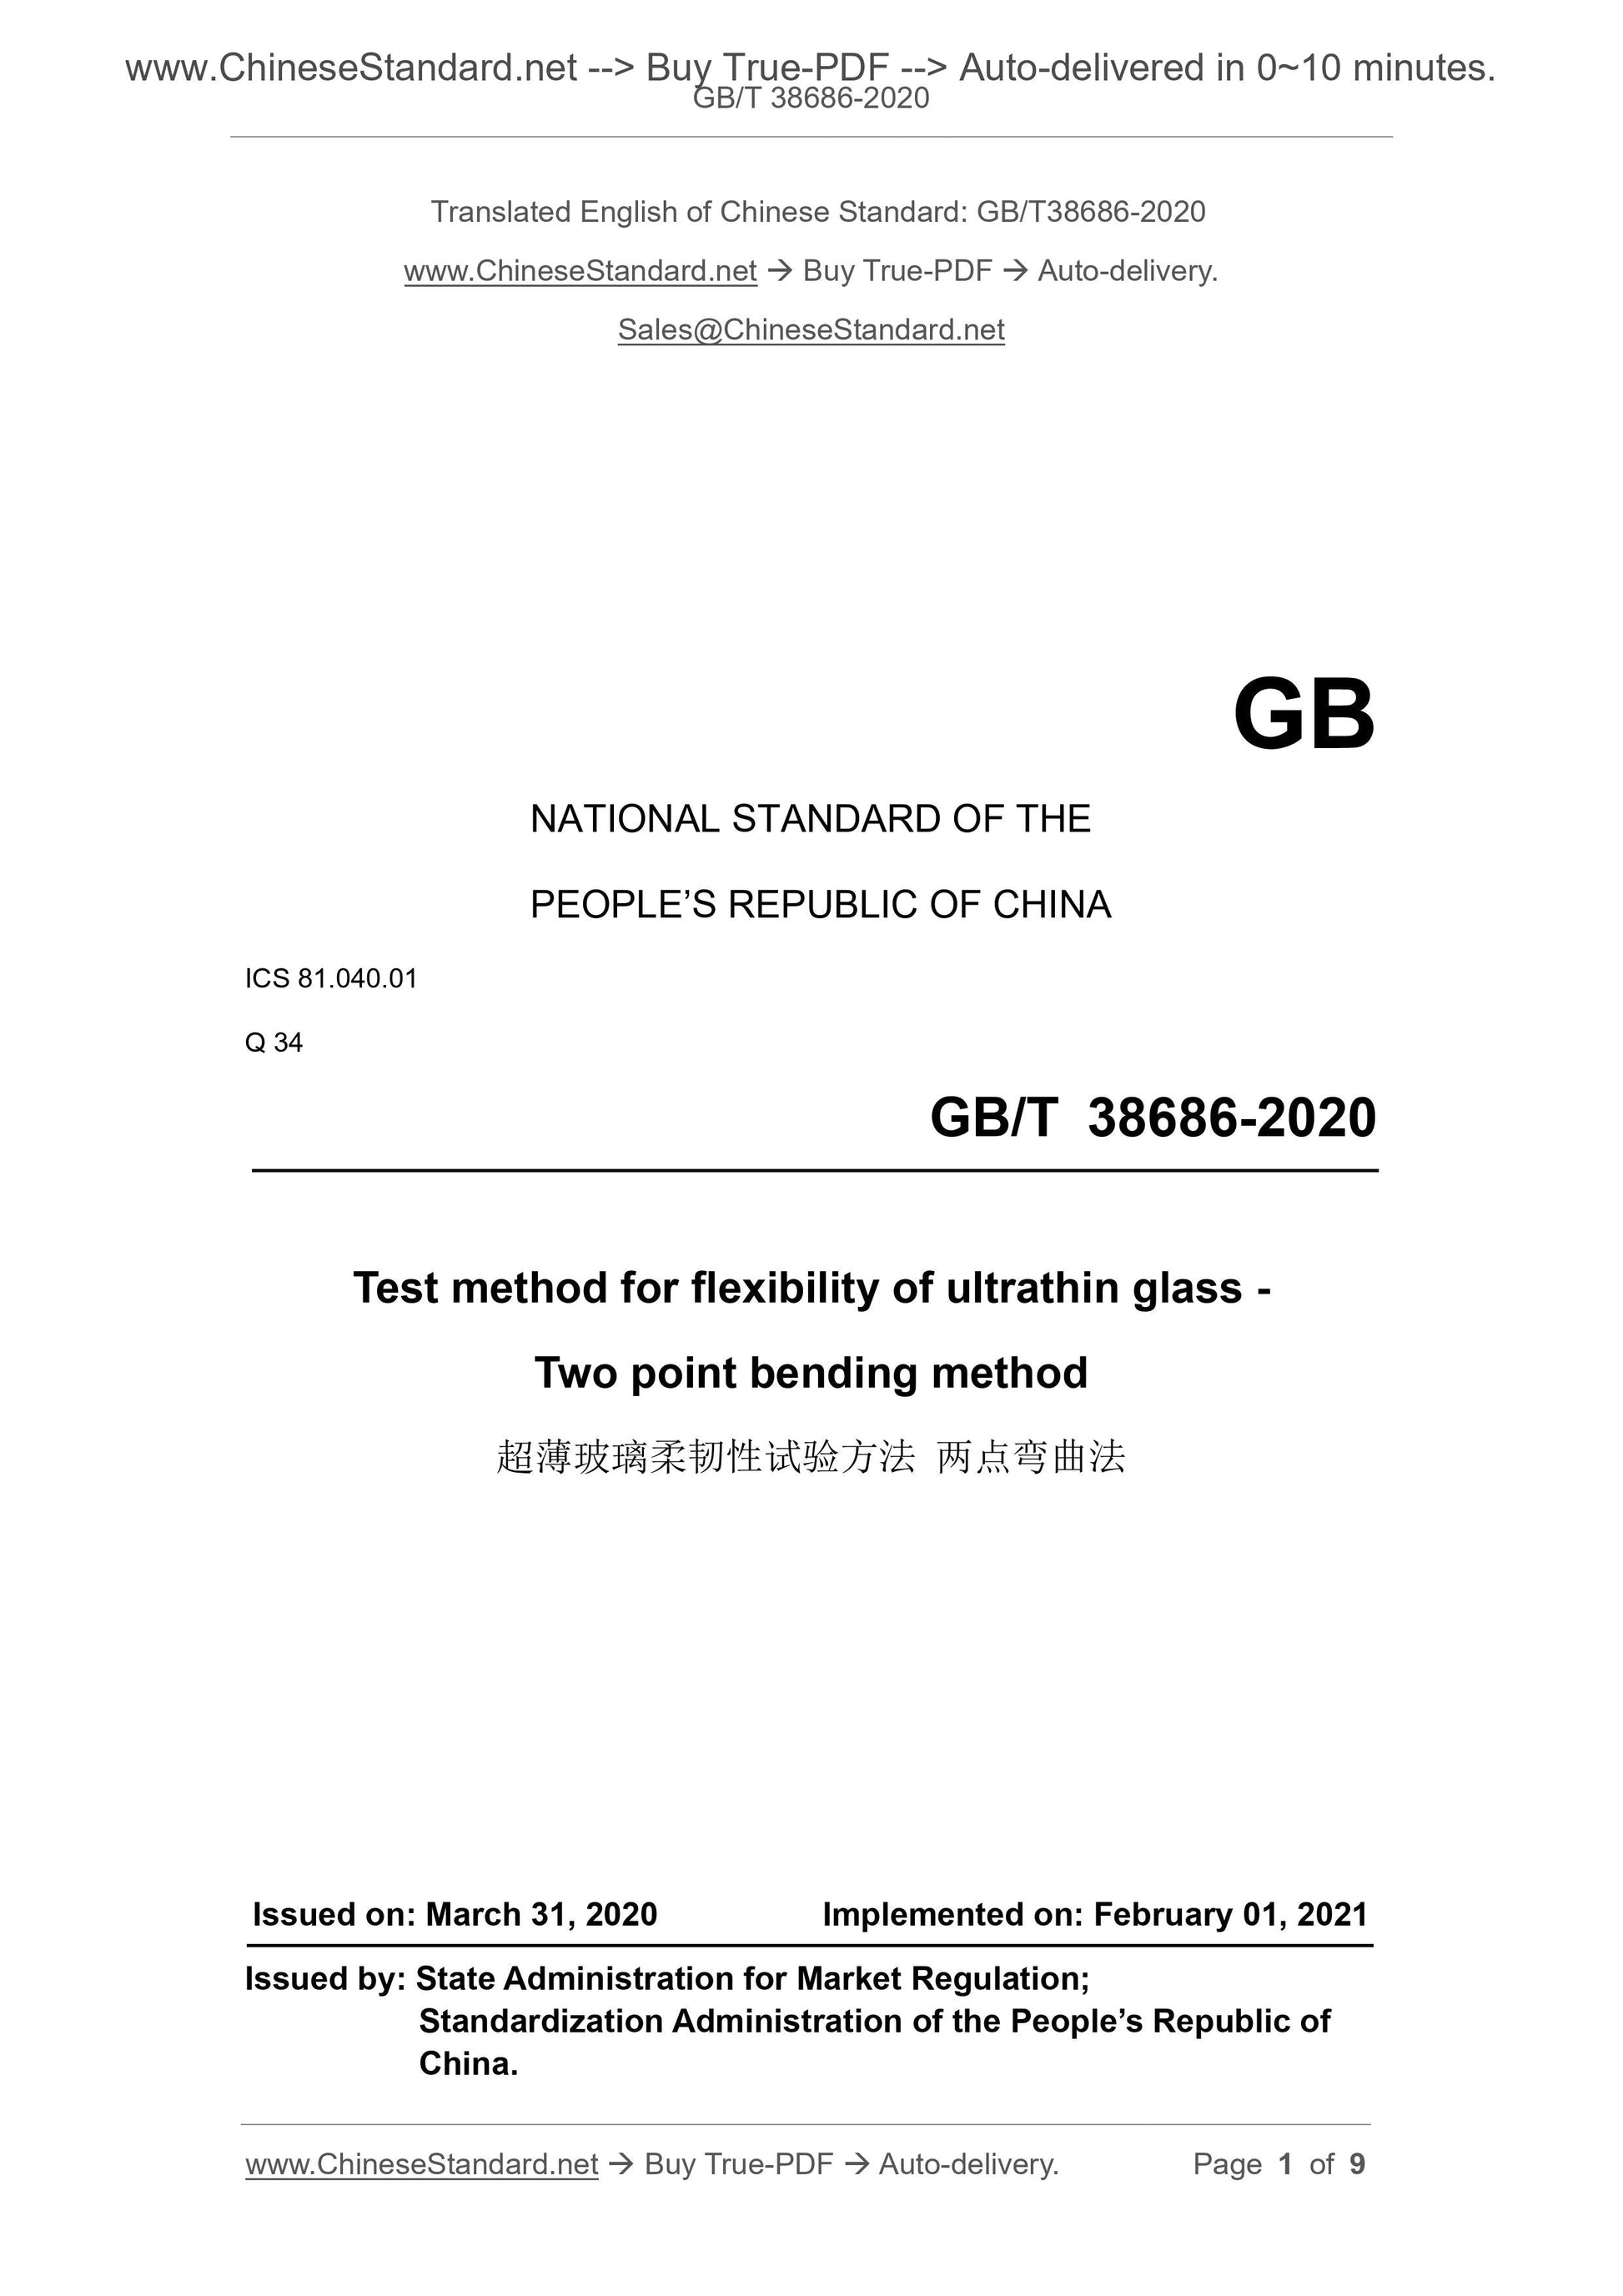 GB/T 38686-2020 Page 1